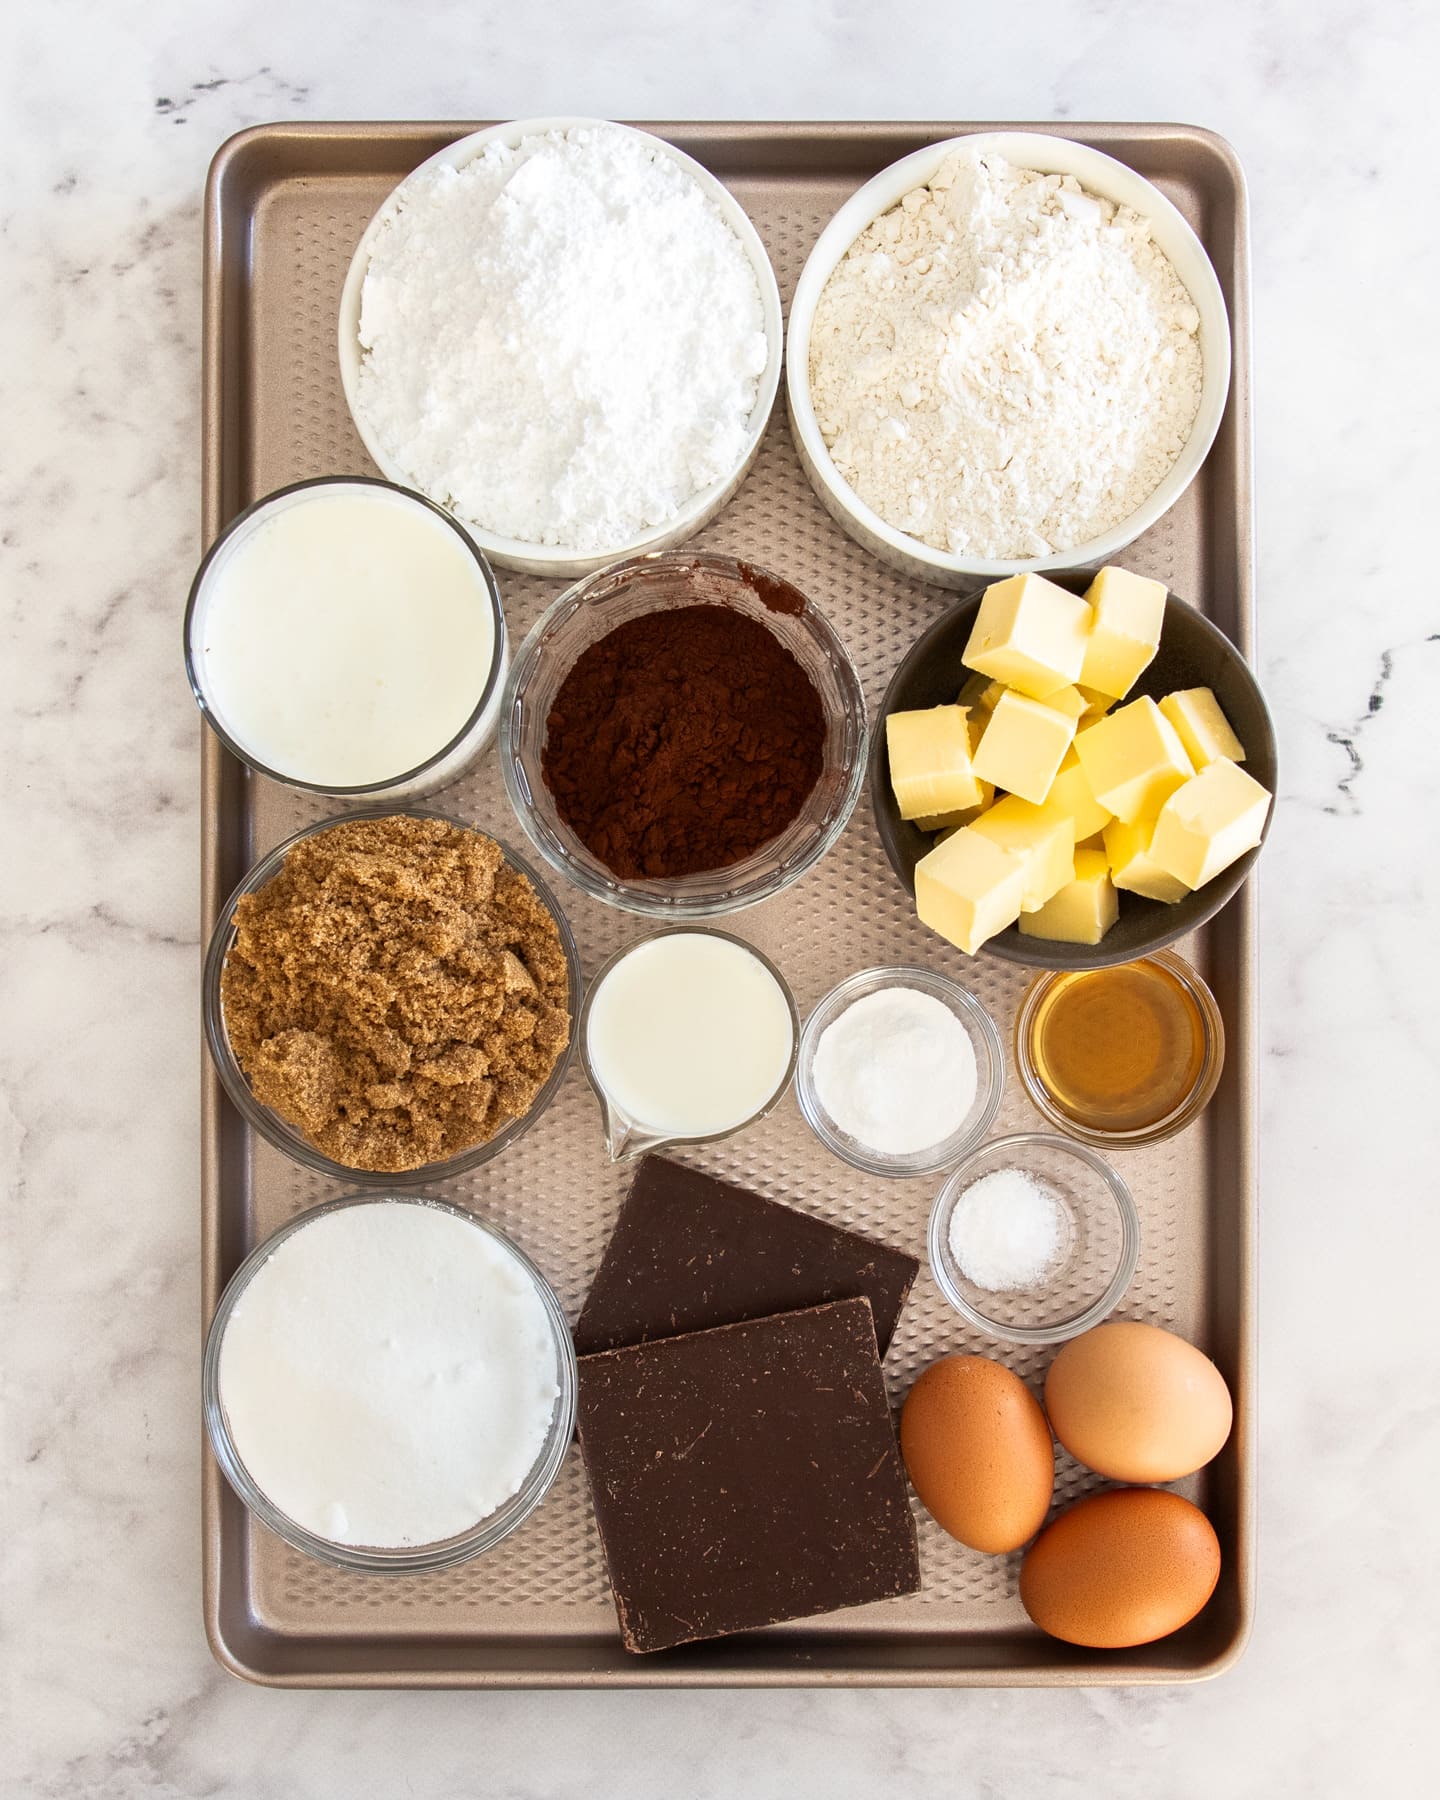 Ingredients for chocolate mini cakes.